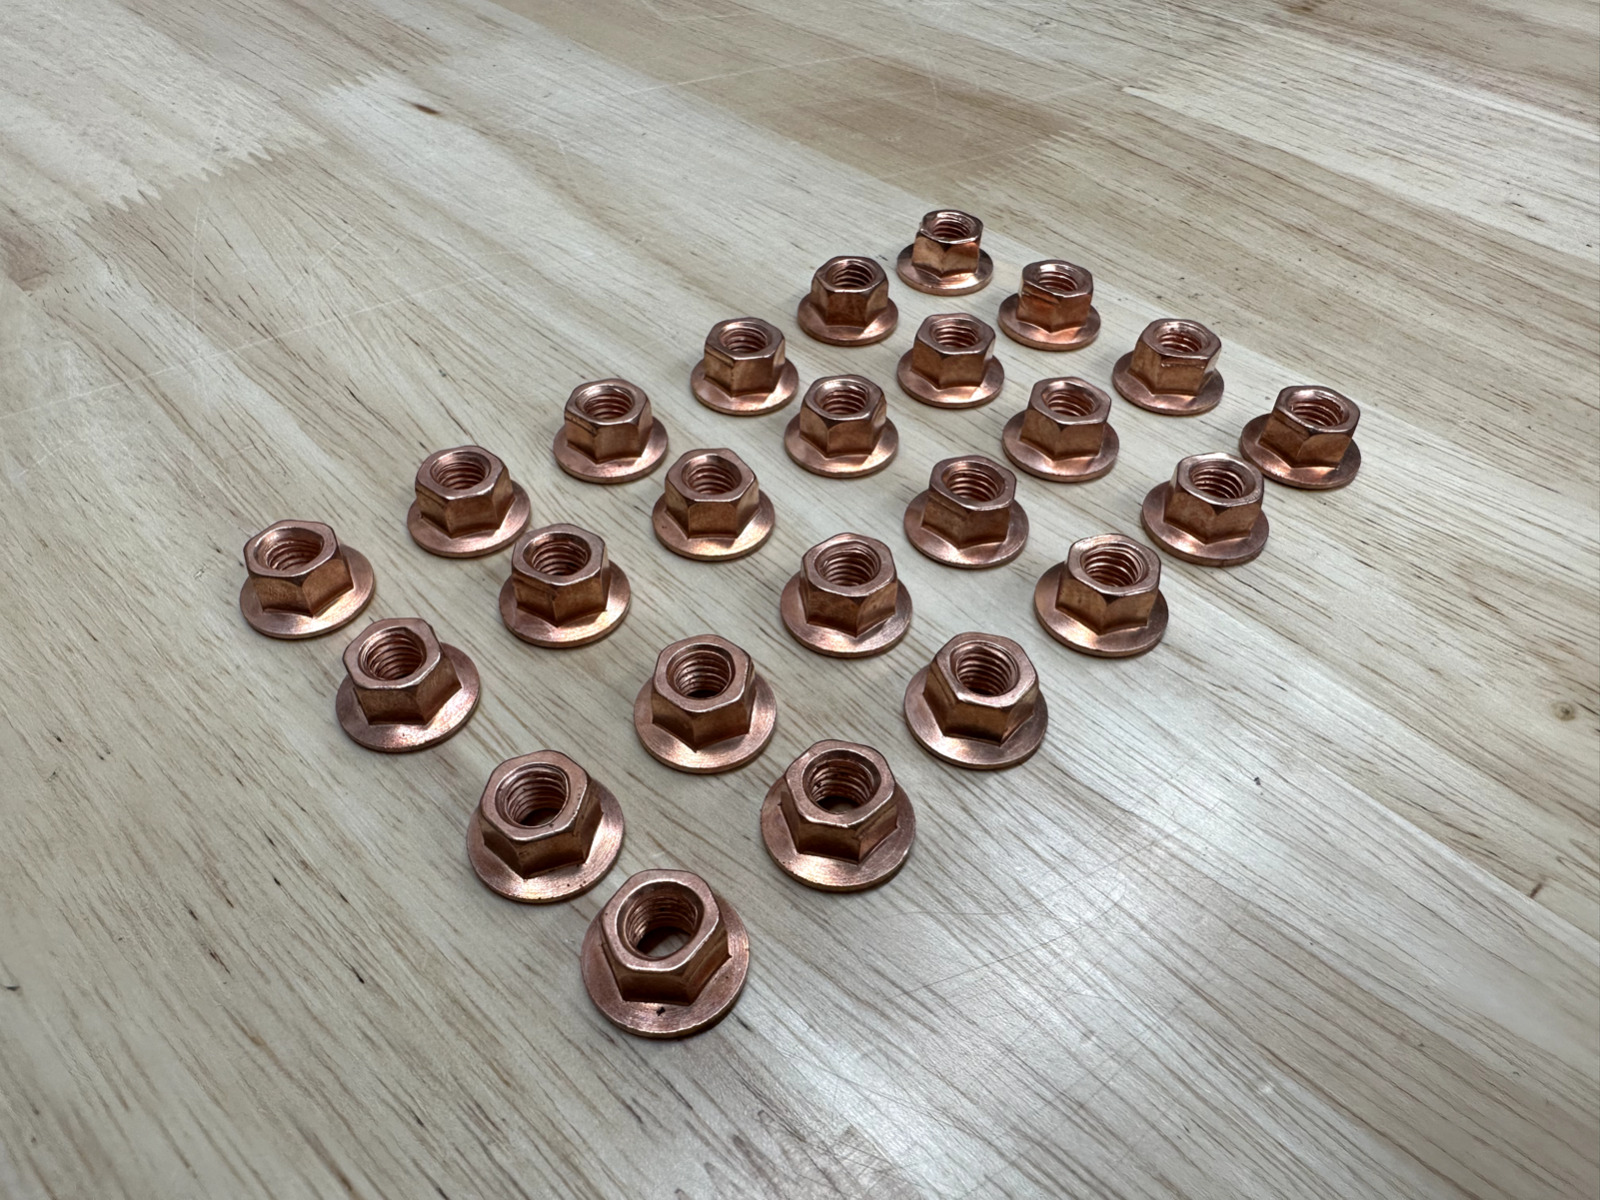 M7x1 Copper Exhaust Stud Nuts  24 Pieces New BMW Audi VW High Quality